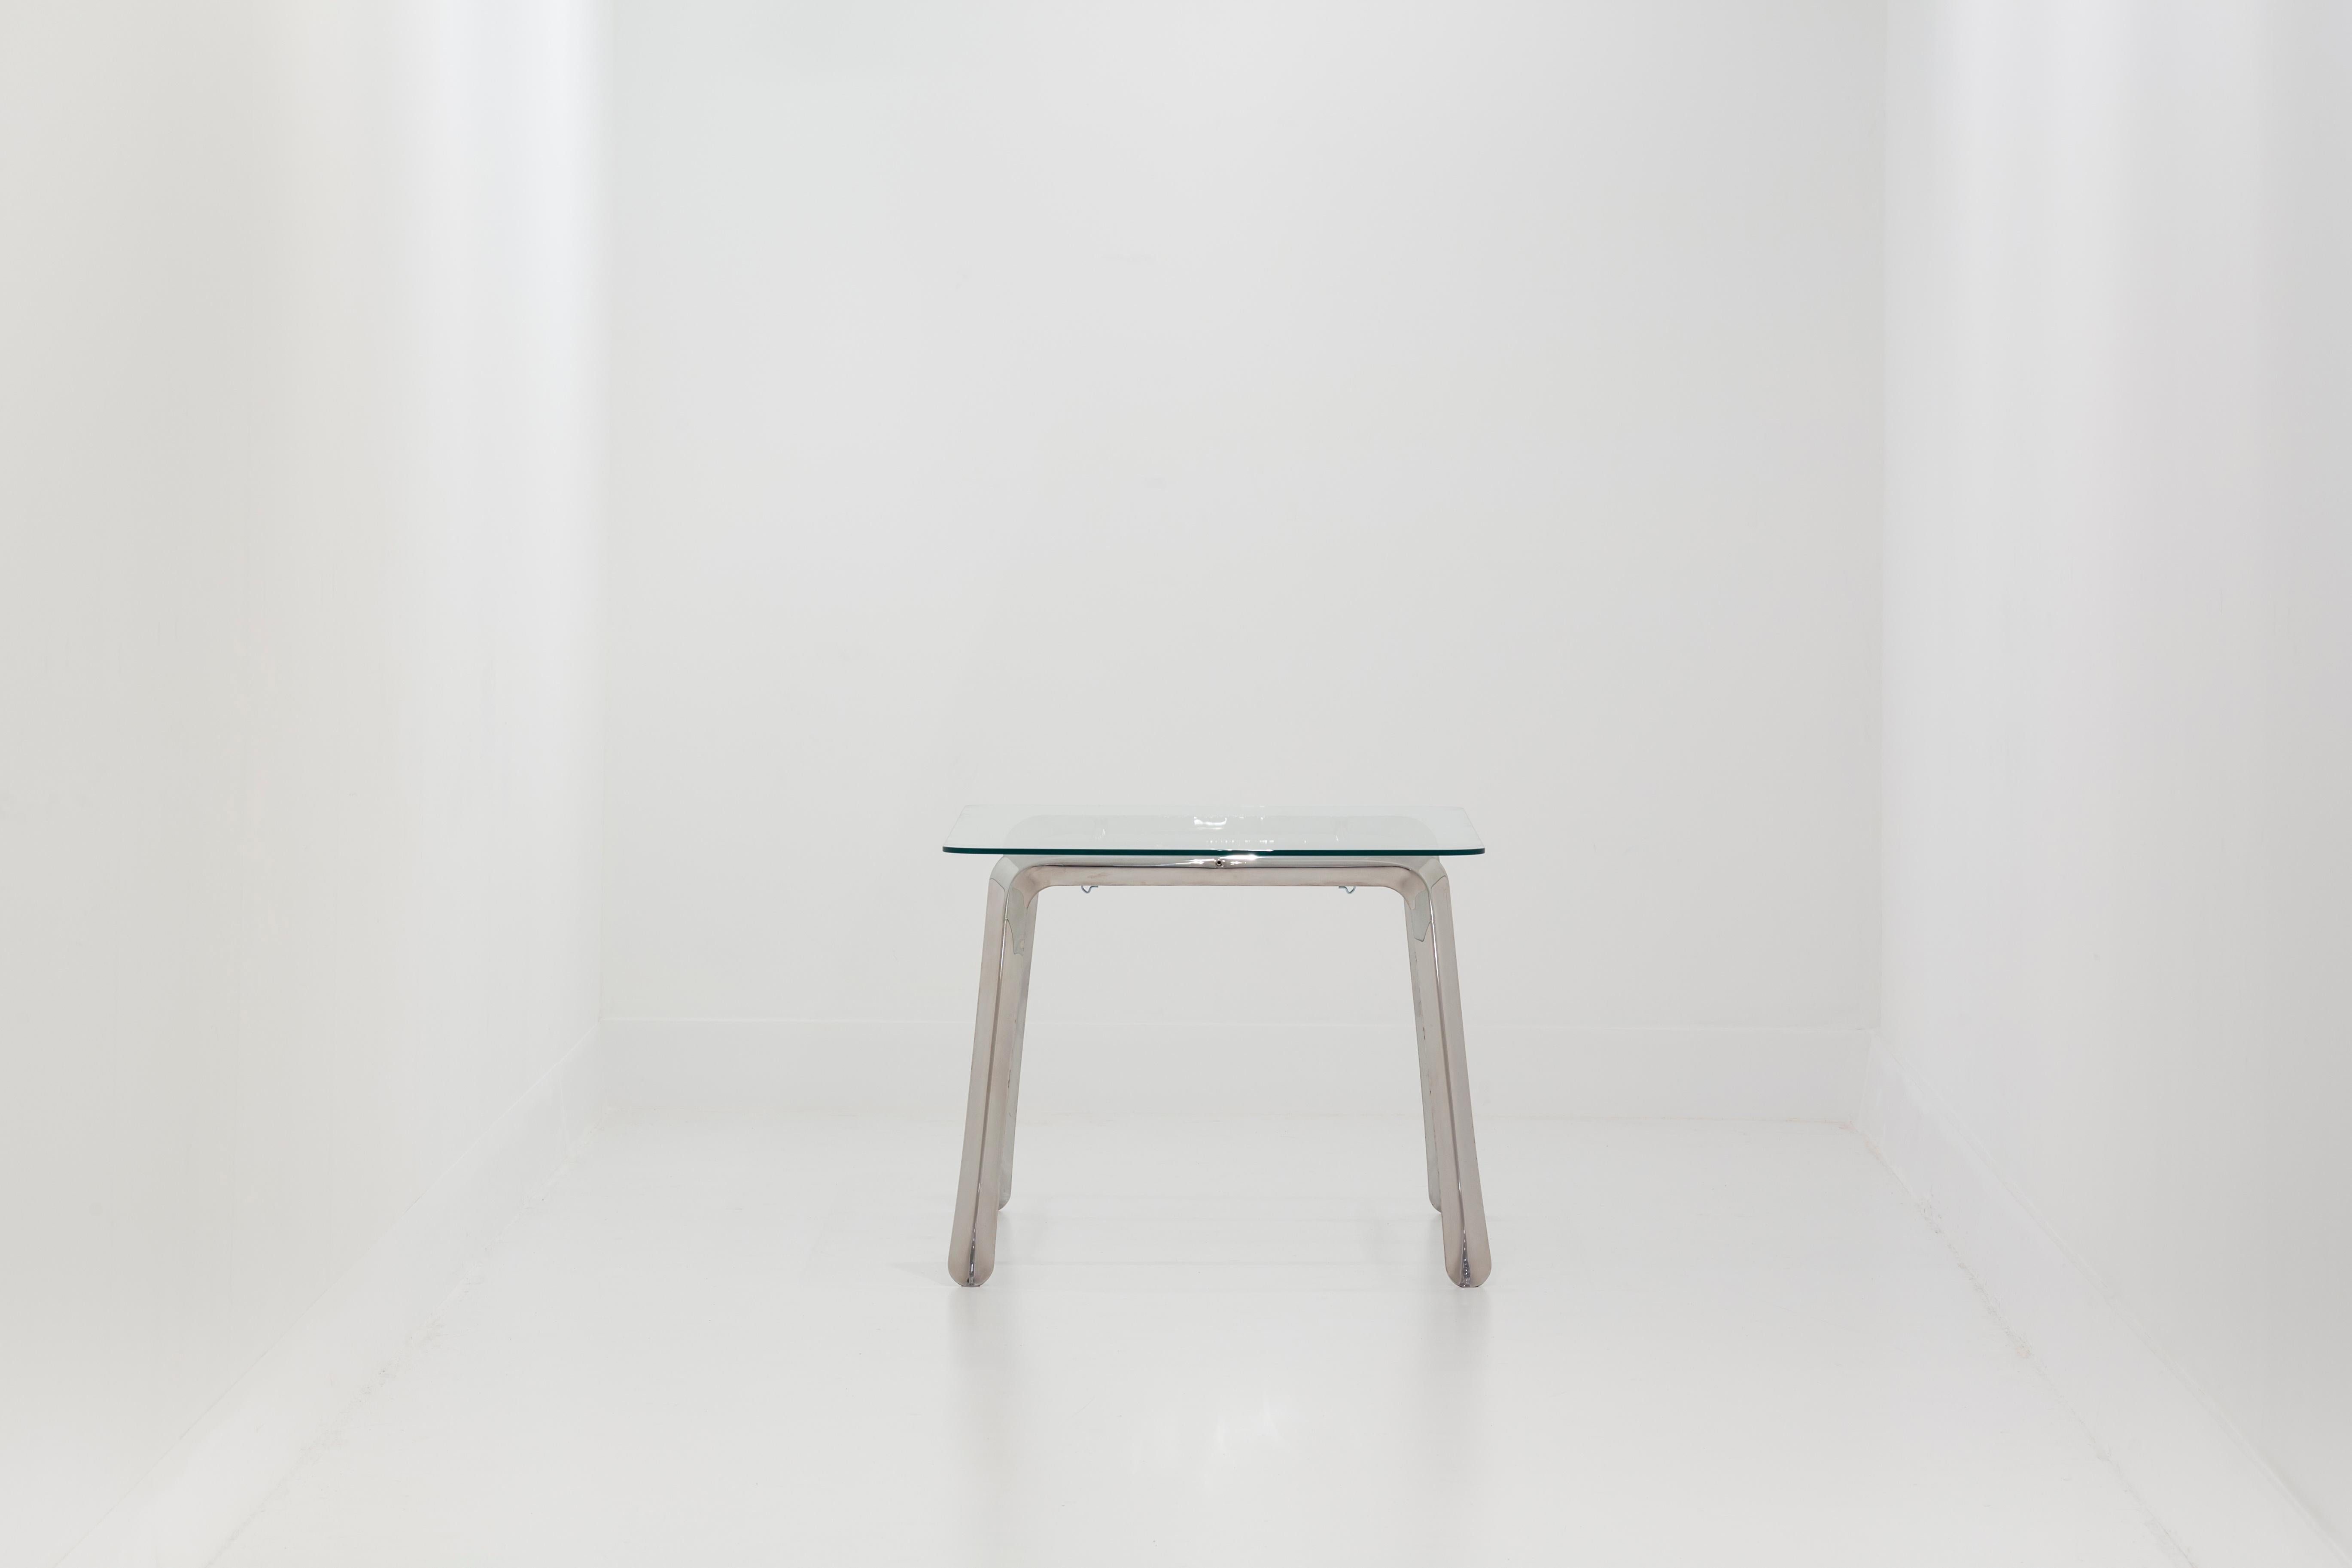 Koziol is a derivative of the Koza II trestle and is converting the trestle into a table frame for a small table to be used in smaller kitchens or as contract furniture for restaurants. Max. size of the table top 1,20 m x 1,20. The table tops need